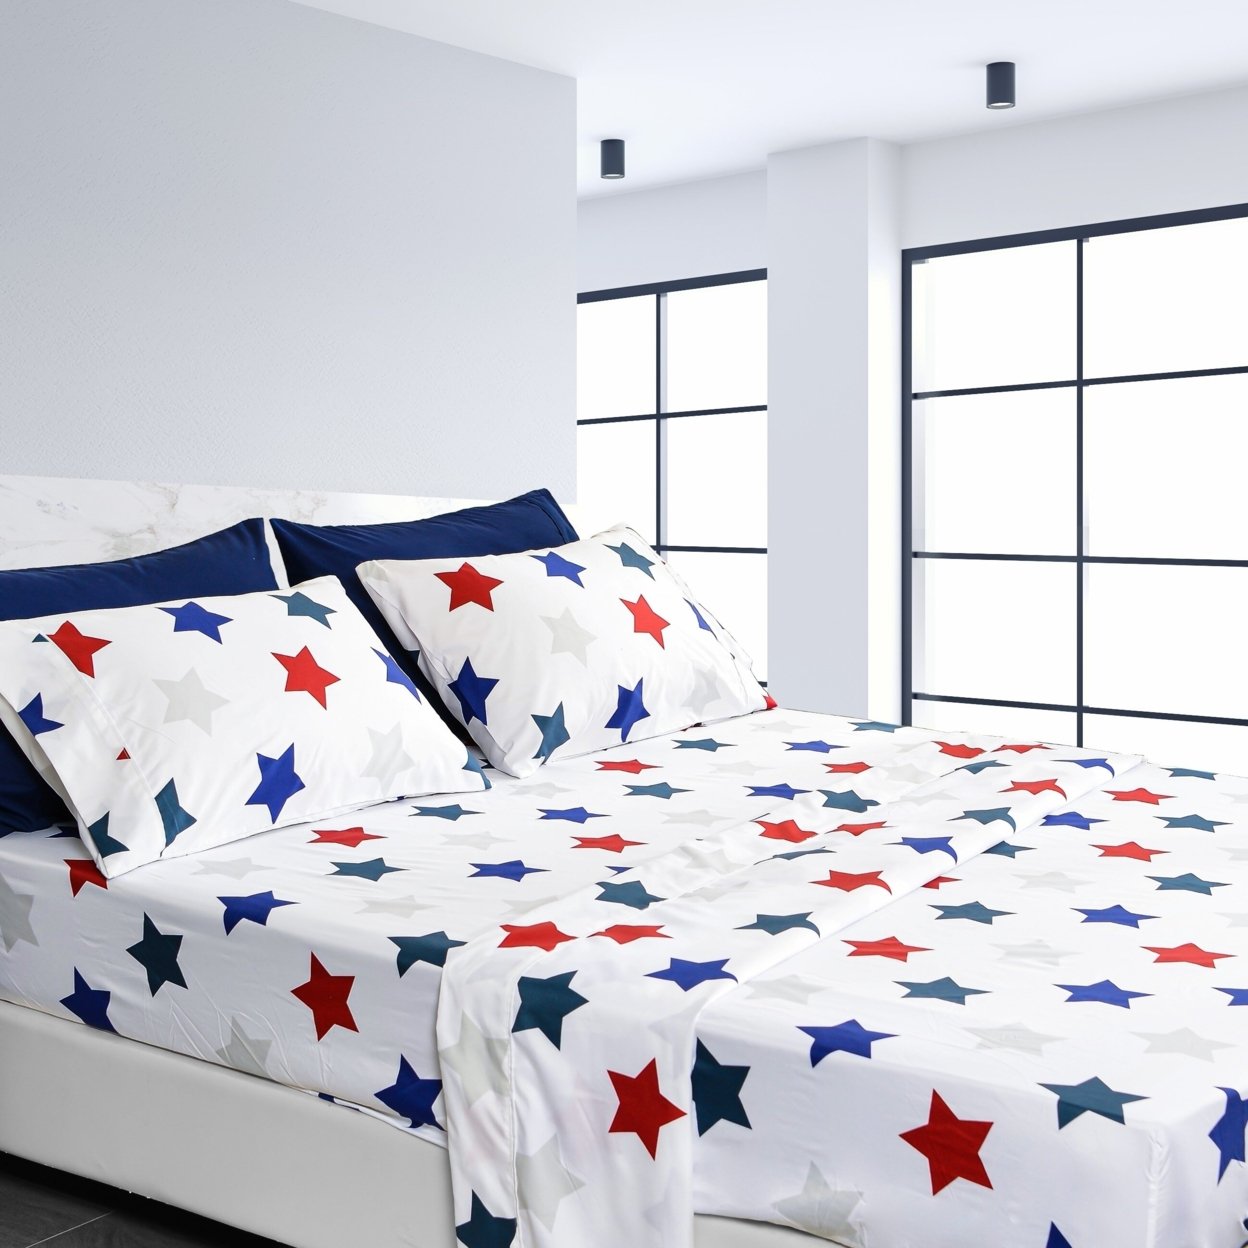 American Home Collection Ultra Soft 4-6 Piece Star Printed Bed Sheet Set - Full